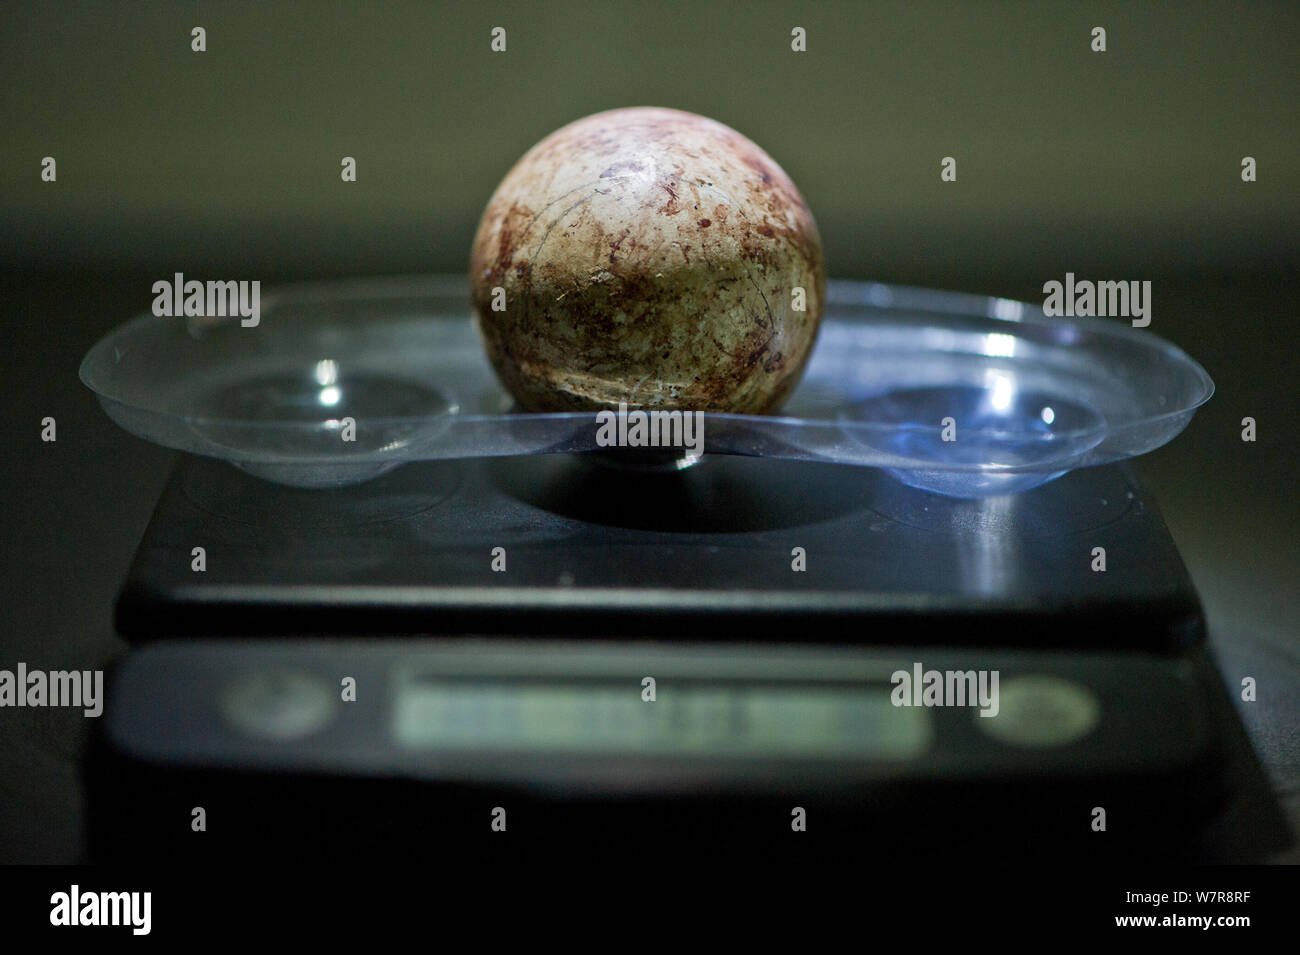 African penguin (Spheniscus demersus) egg being weighed, part of Chick Bolstering Project, Southern African Foundation for the Conservation of Coastal Birds (SANCCOB), South Africa May 2012 Stock Photo